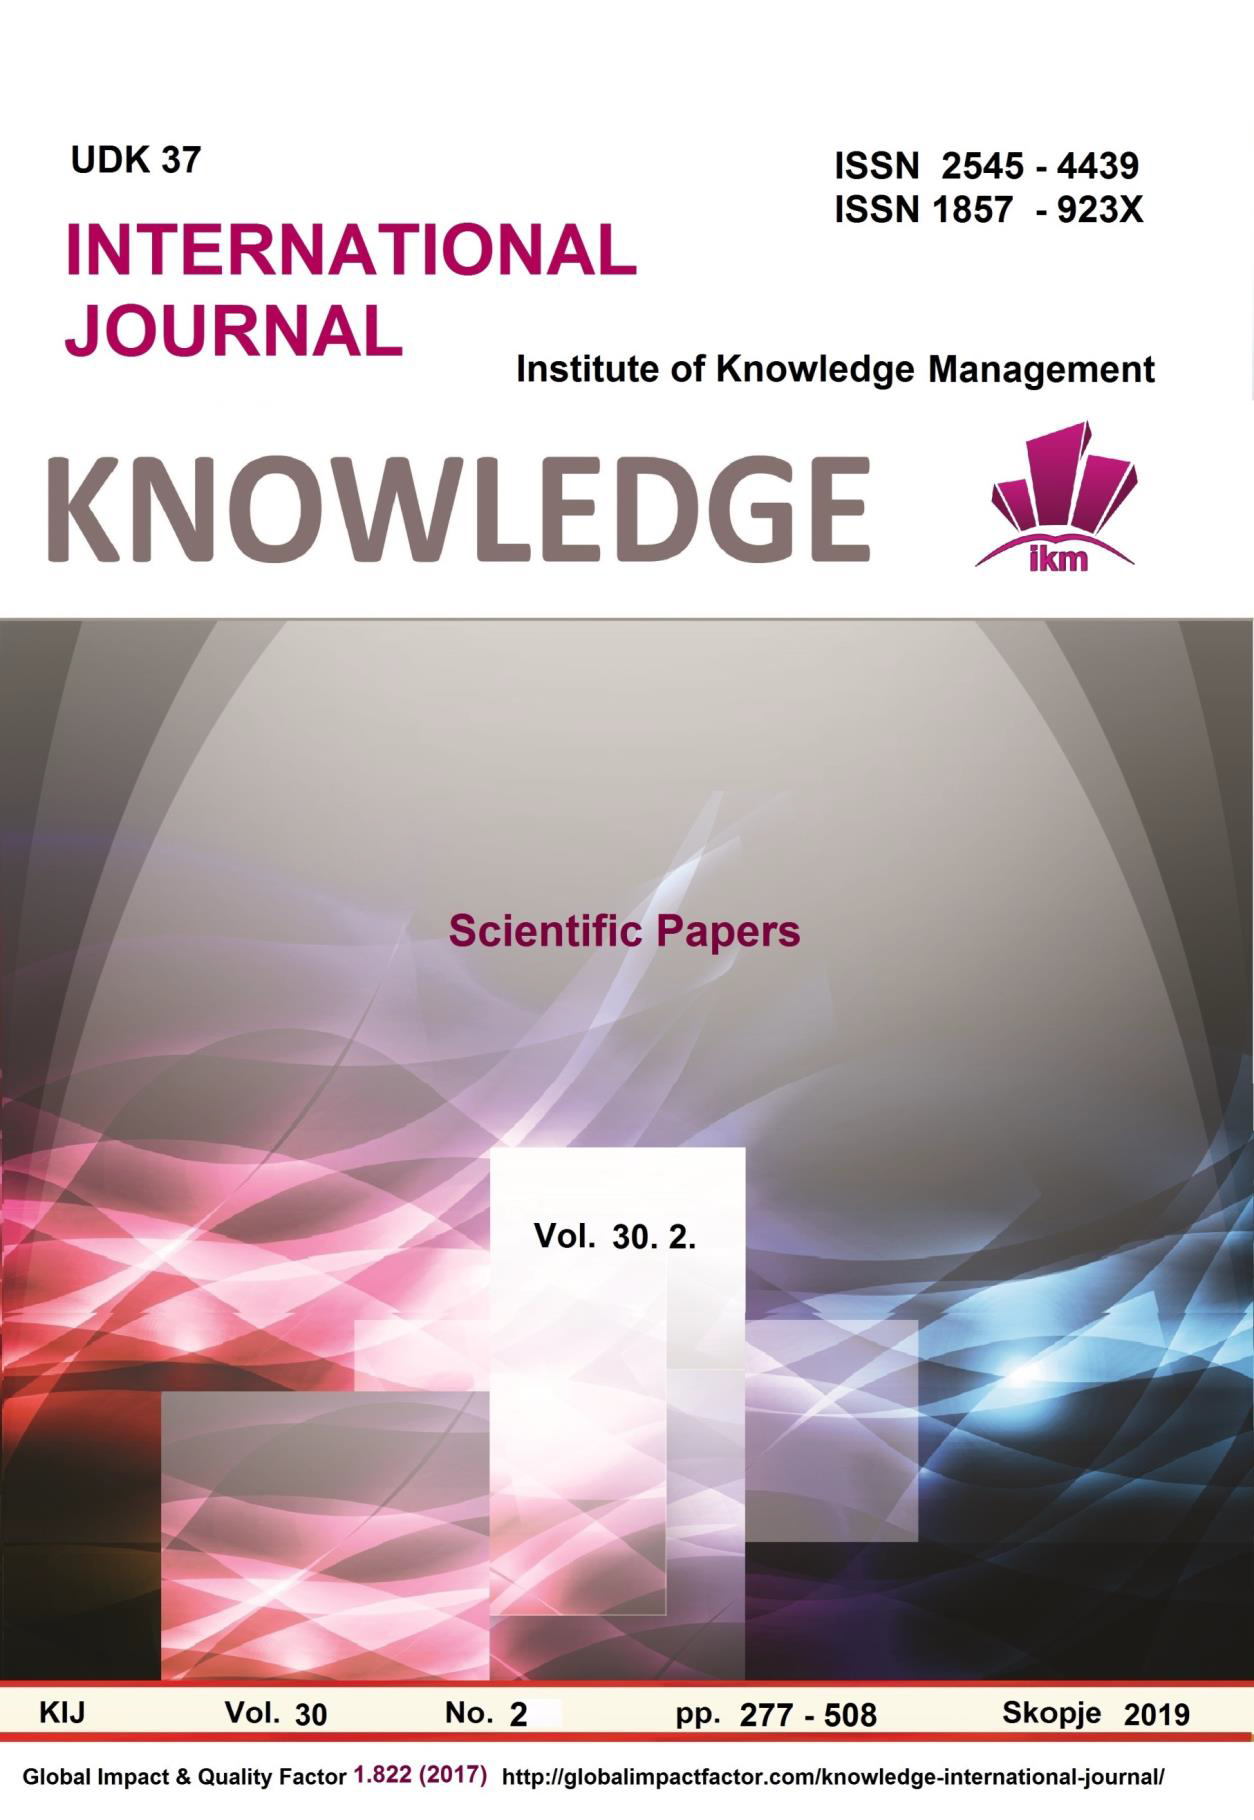 					View Vol. 30 No. 2 (2019): Knowledge without borders
				